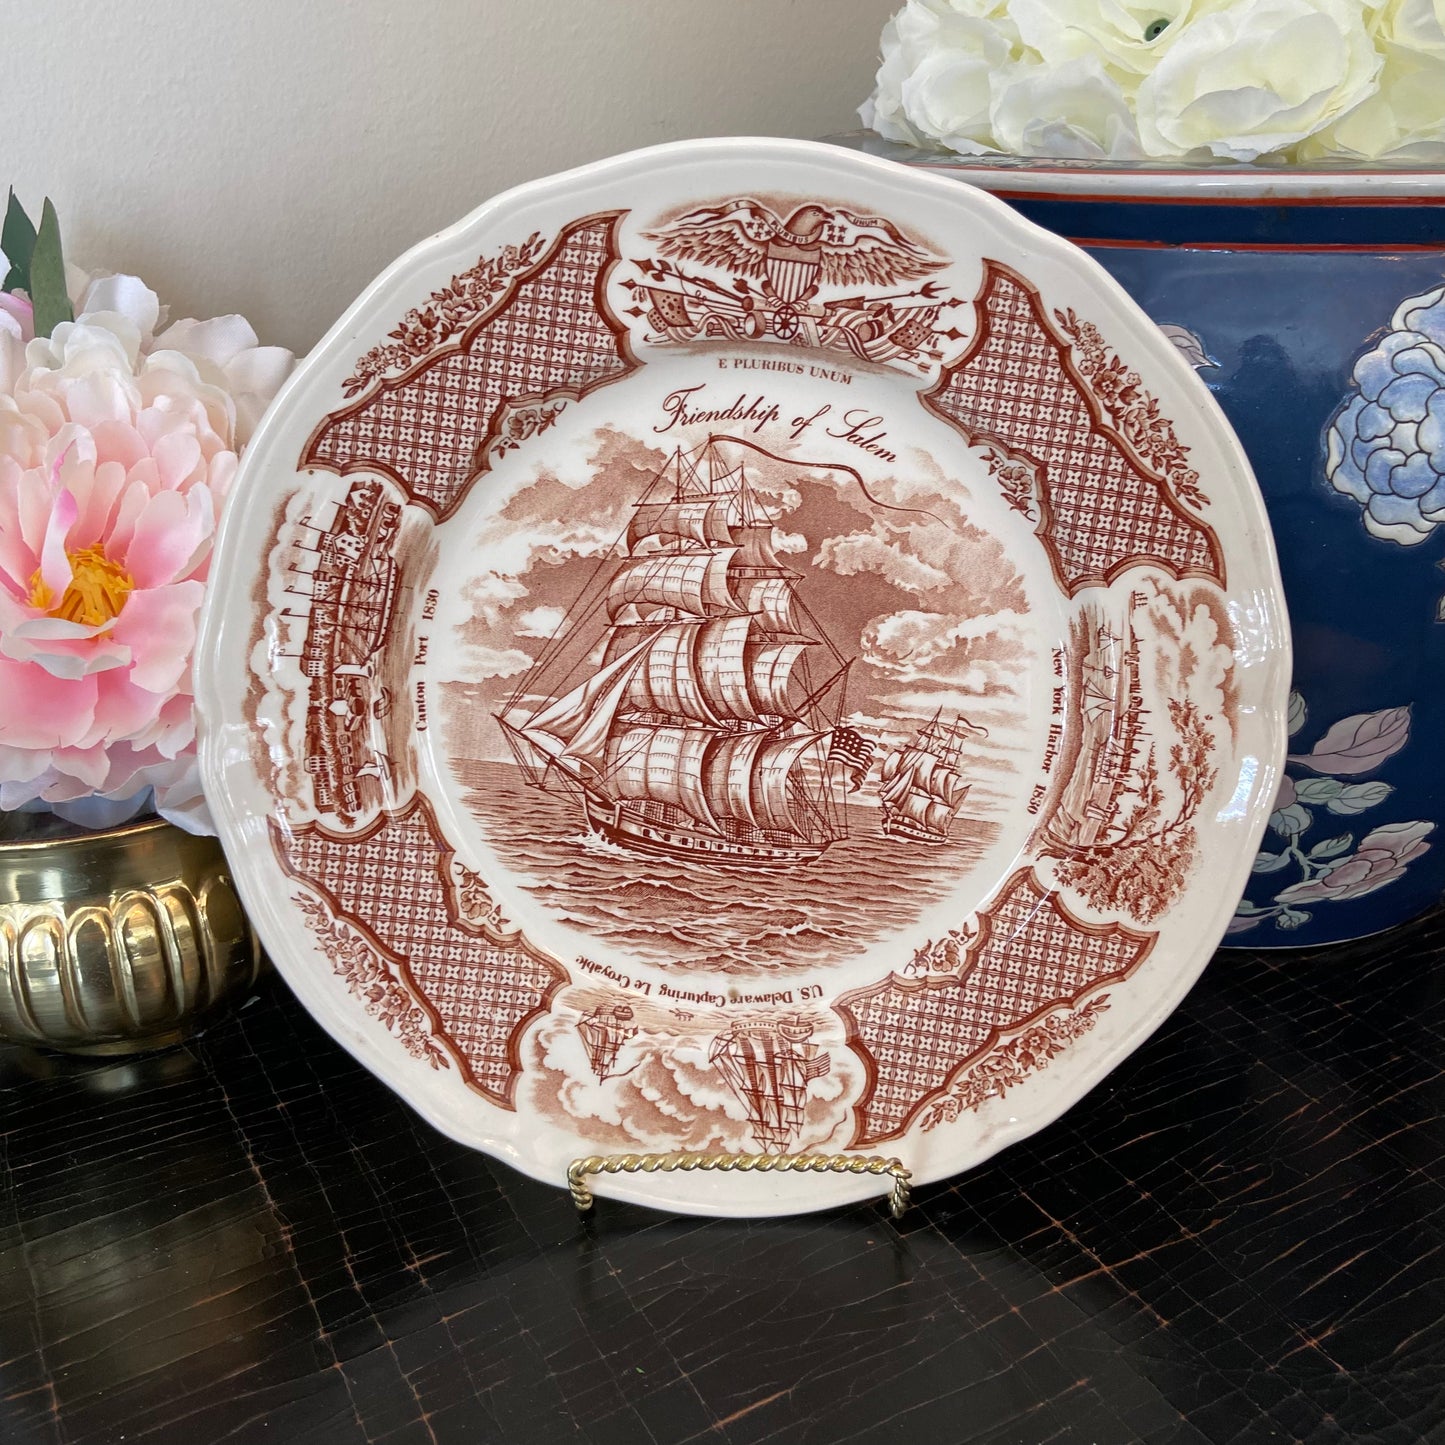 Vintage Staffordshire brown and white plate Fair Winds by Alfred Meakin, England